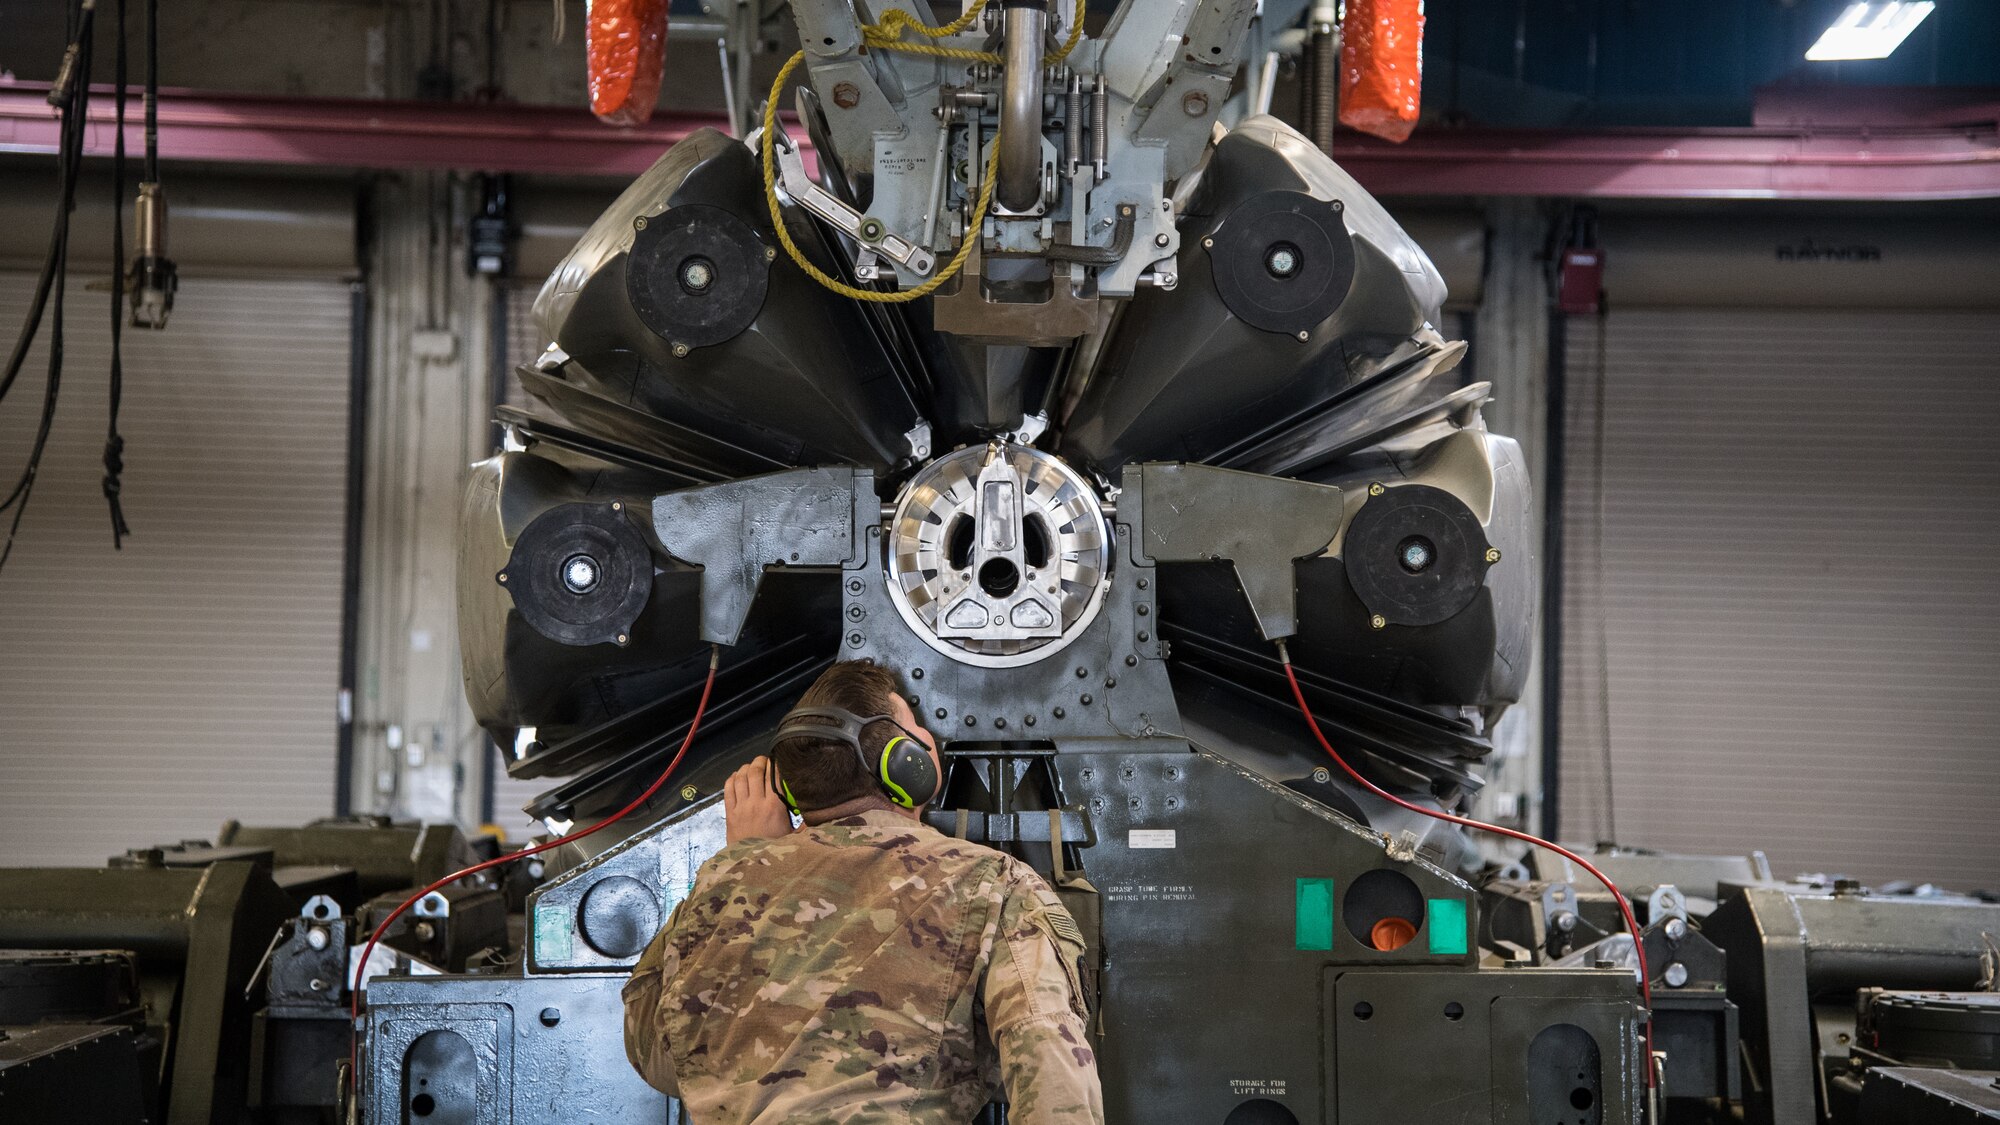 Senior Airman Ryan B. Jarvis, 2nd Munitions Squadron launcher maintenance technician, watches as the last Conventional Air-Launched Cruise Missile (CALCM) is loaded into a launcher at Barksdale Air Force Base, La., Nov. 20, 2019. The 2nd MUNS loaded the final CALCM missile package into a launcher in order to disassemble the weapon to become demilitarized. (U.S. Air Force photo by Airman 1st Class Jacob B. Wrightsman)